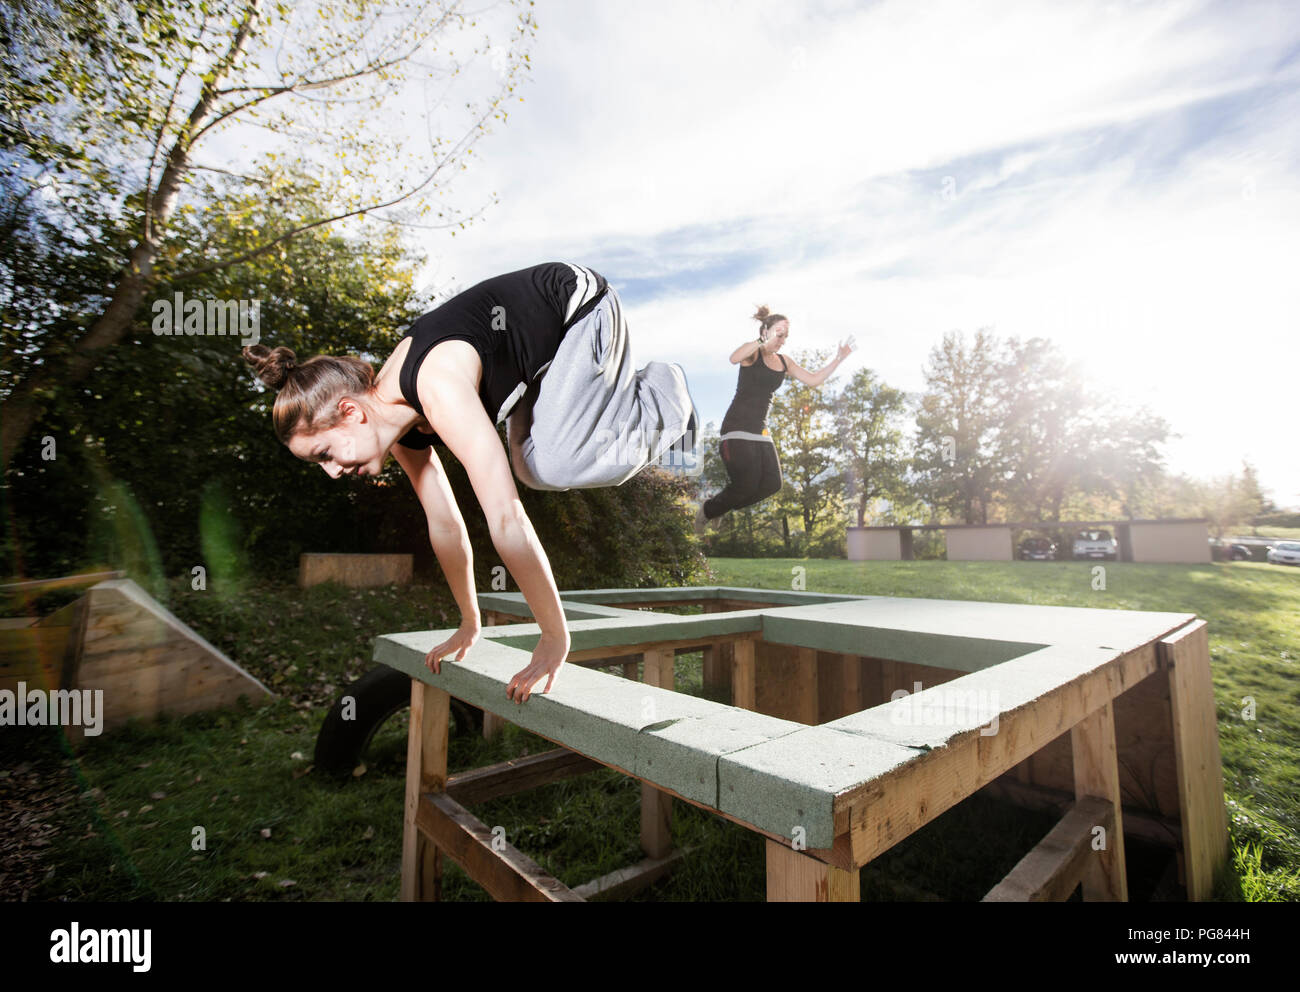 Woman jumping over barrier during freerunning exercise Stock Photo